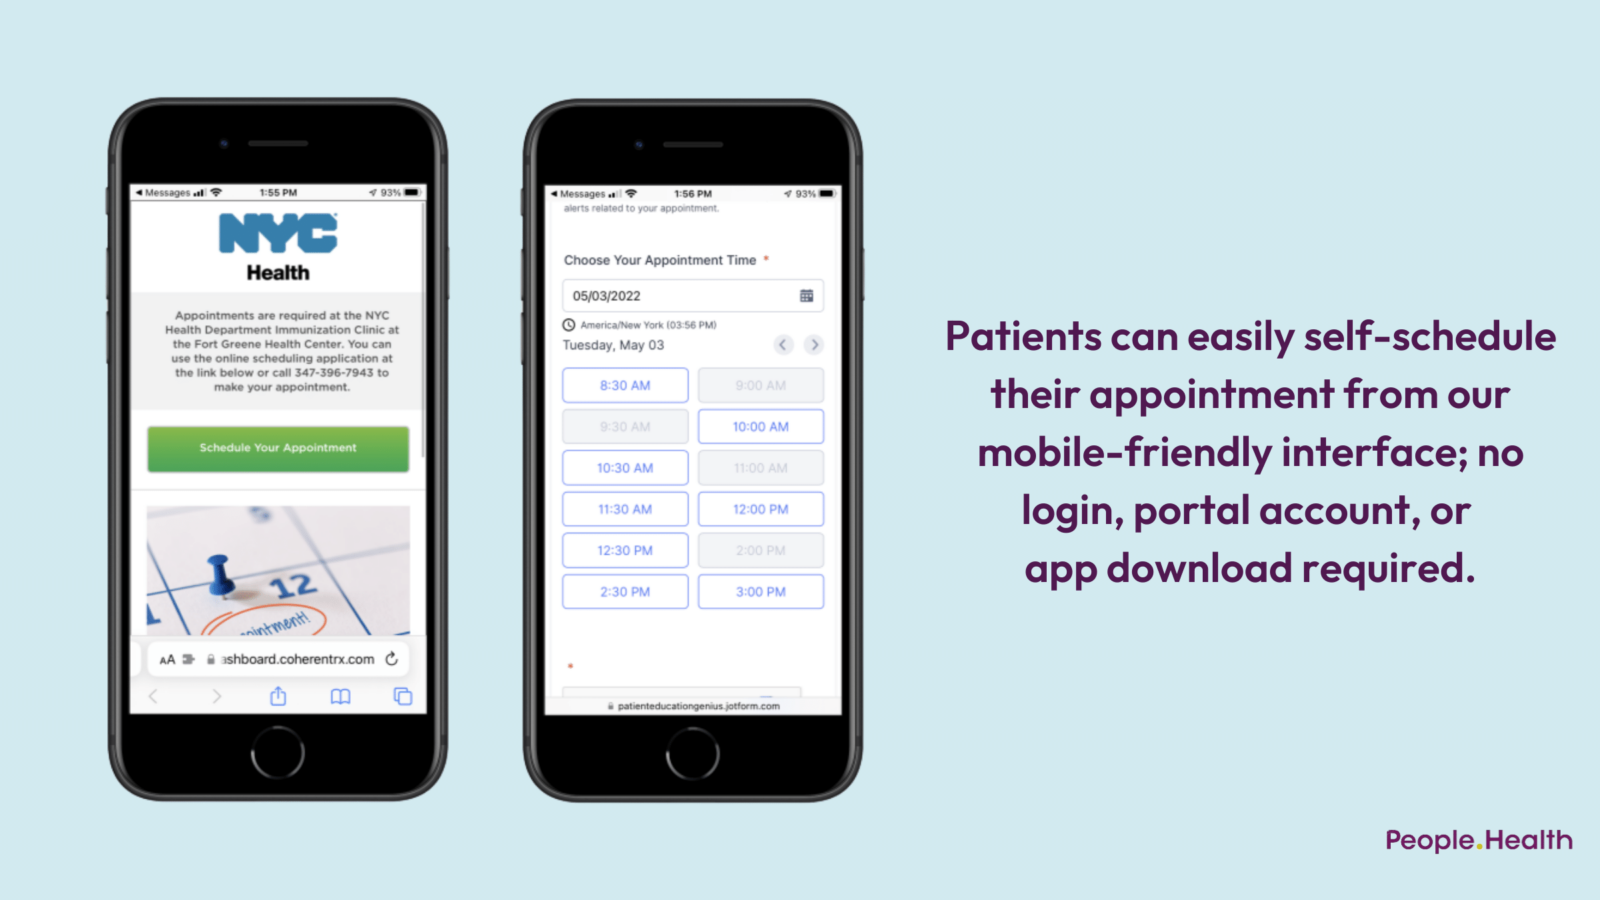 Patients can easily self-schedule their appointment from our mobile-friendly interface; no login, protal account, or app download required.